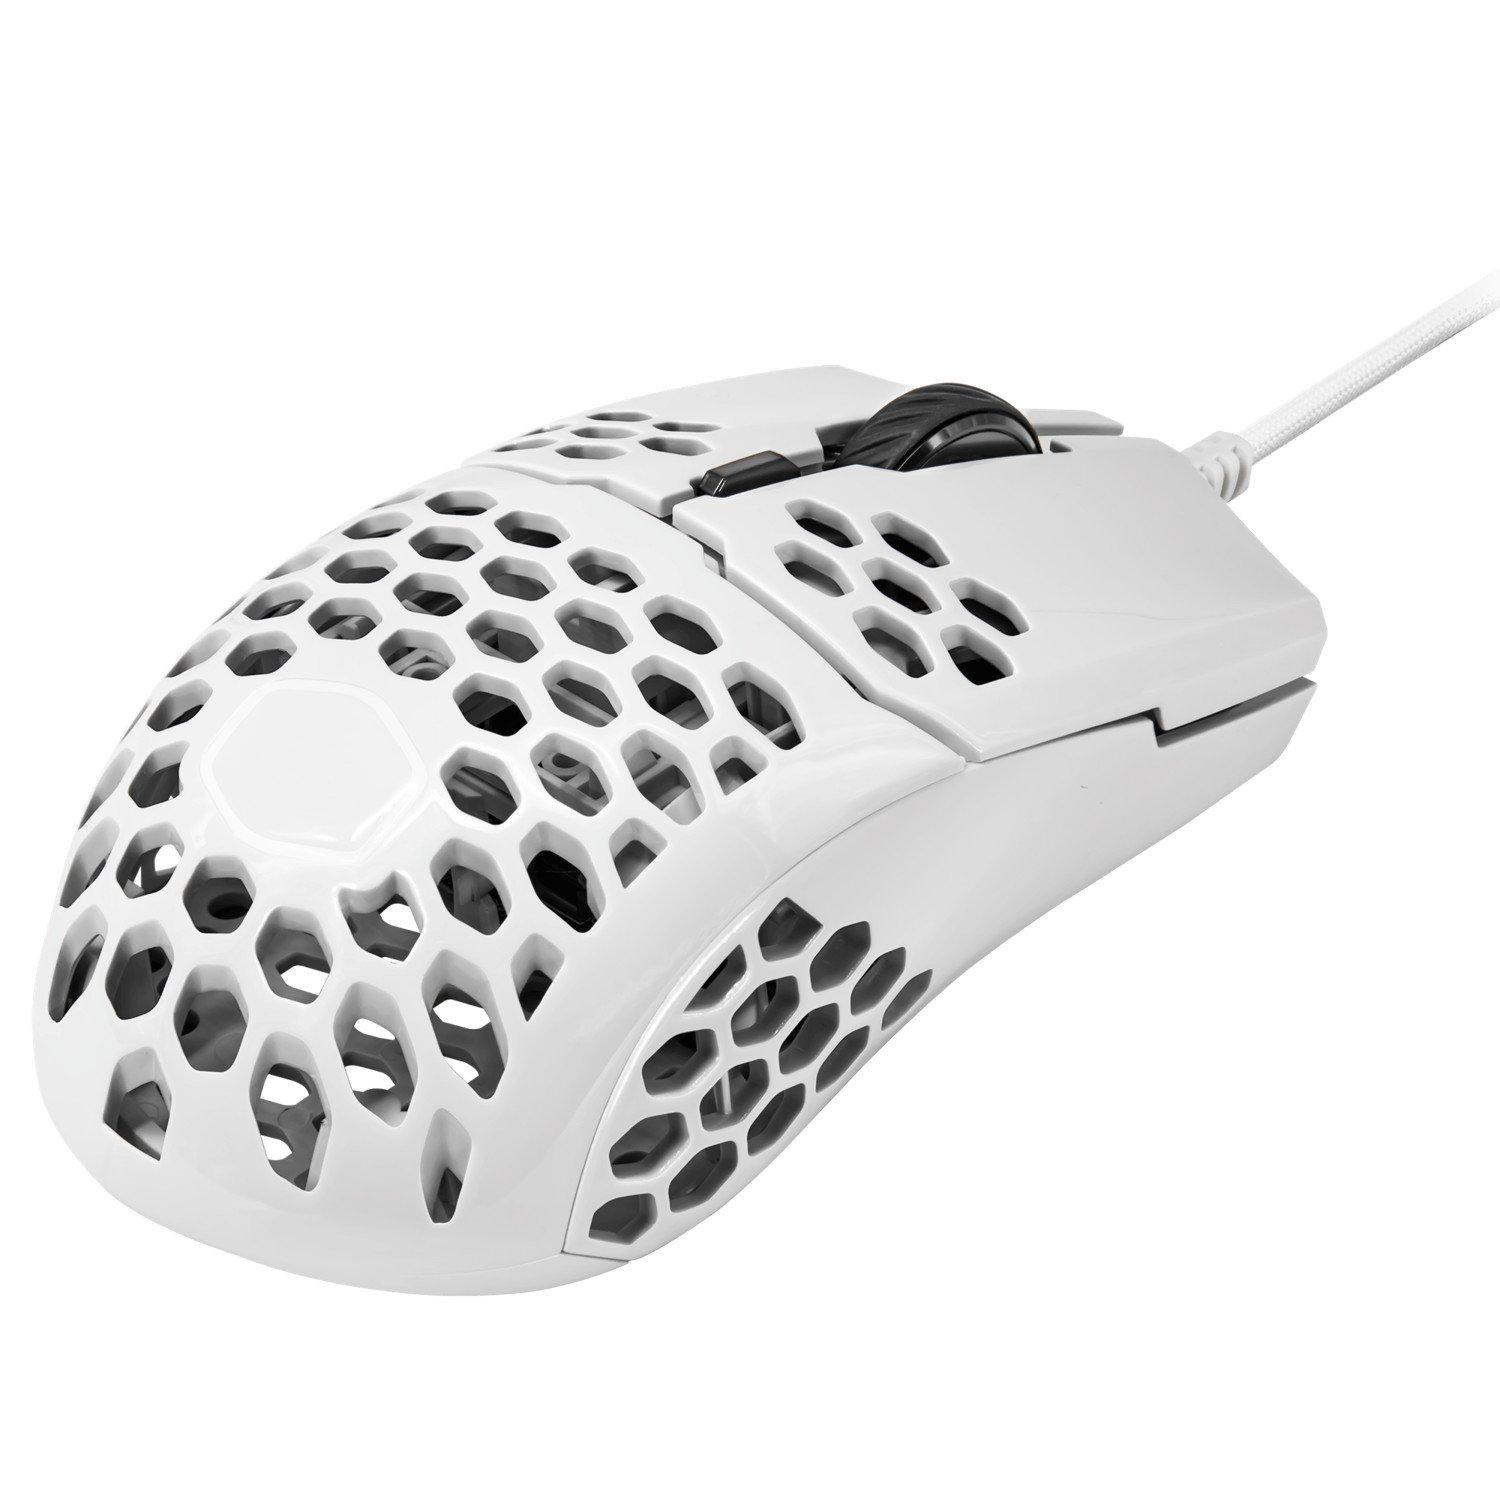 list item 4 of 6 Cooler Master MM710 Gaming Mouse